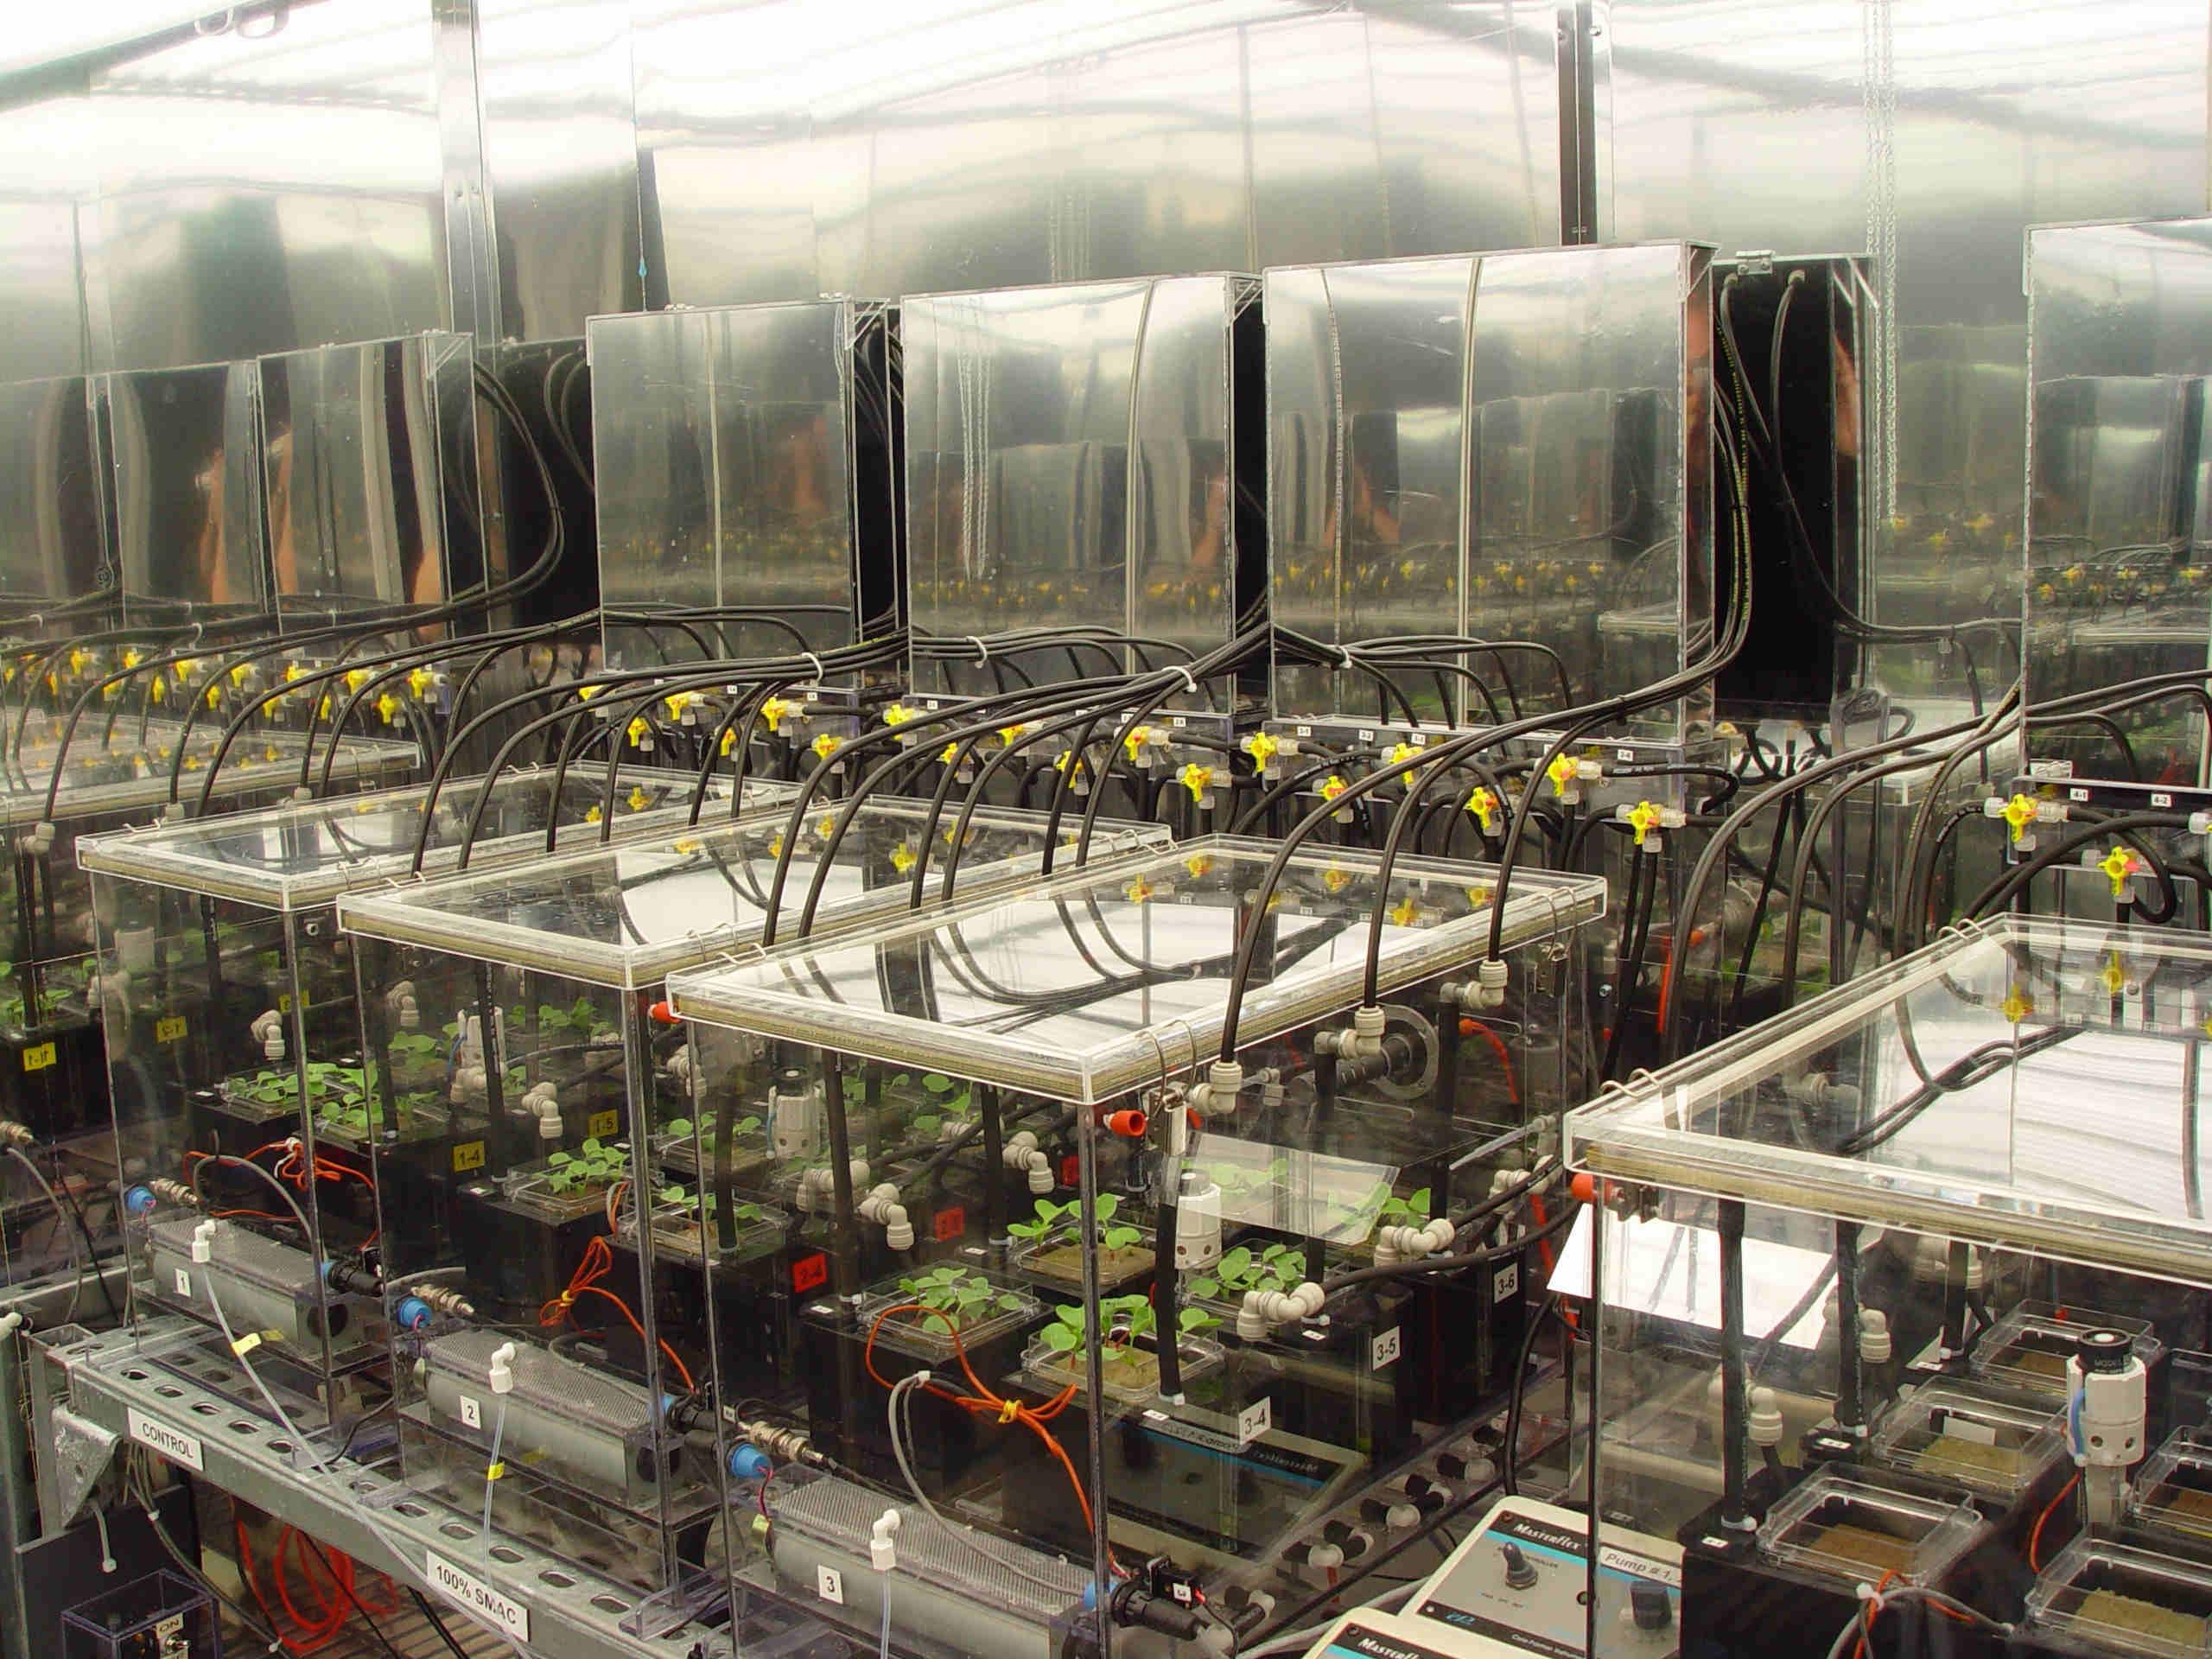 This image shows several rectangular boxes with green plants growing inside them and wires and other hardware surrounding and feeding into them.